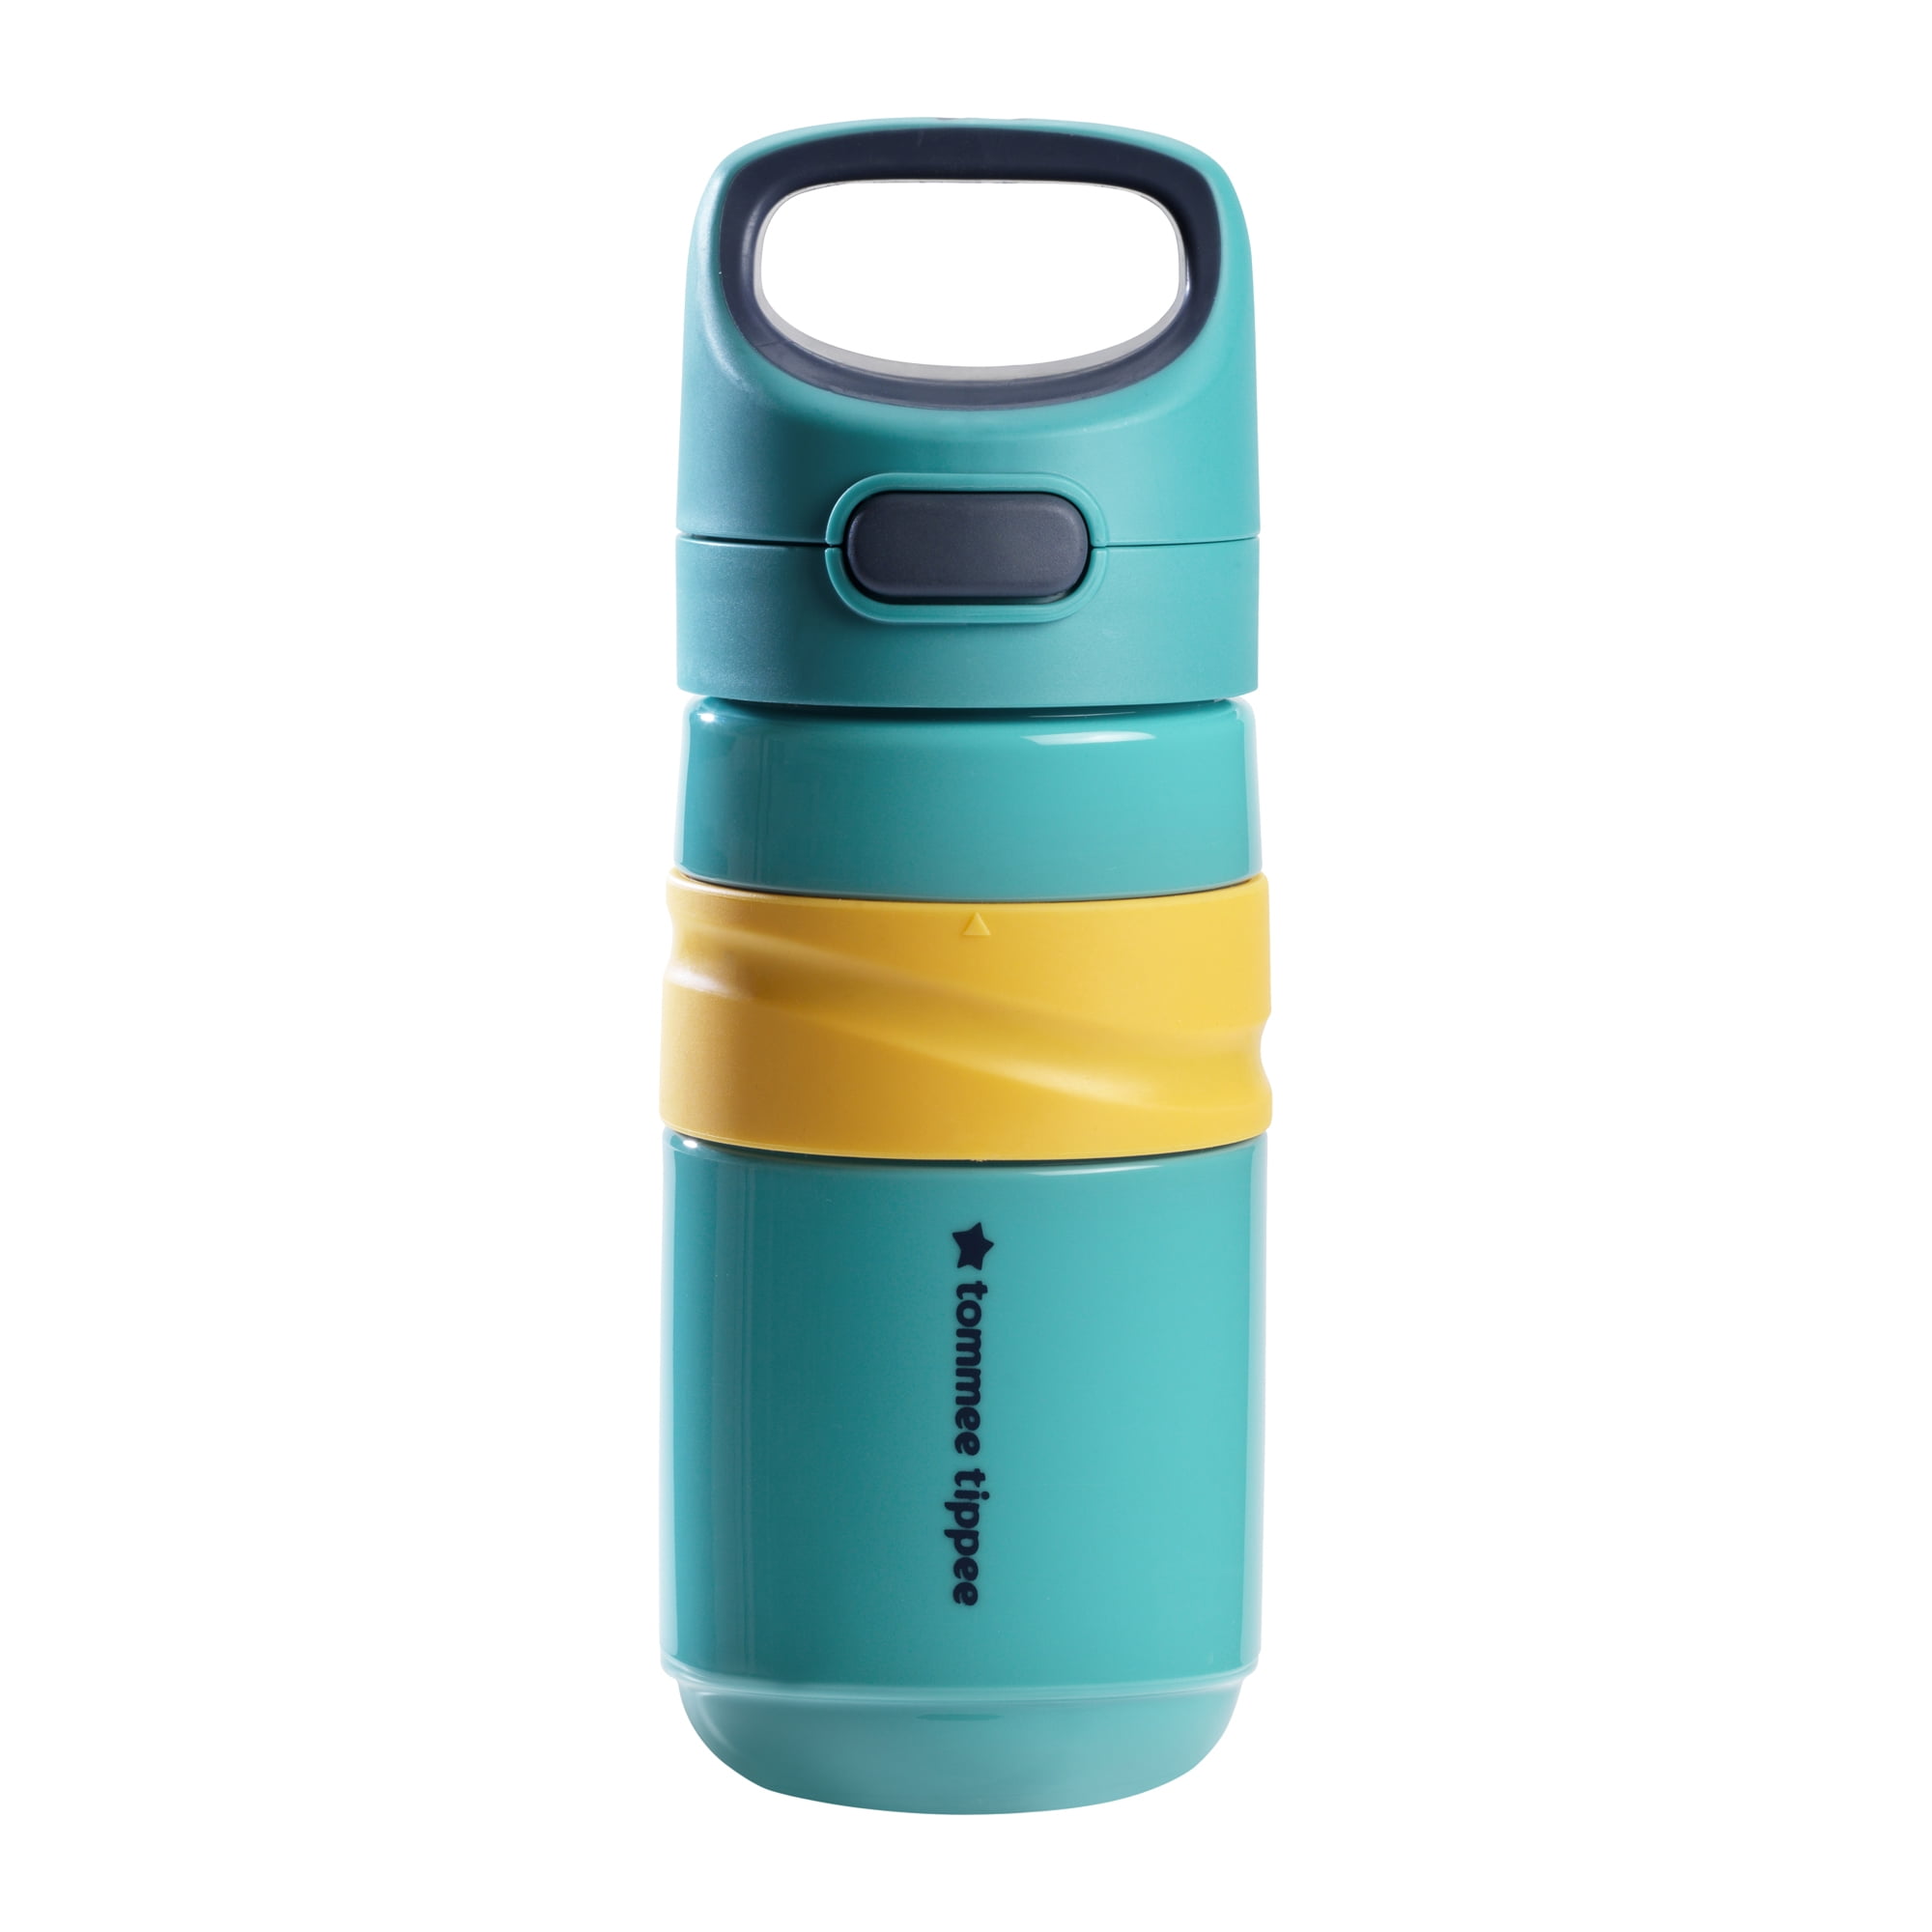 Tommee Tippee Superstar Insulated Flip Top Sportee Cup | 11oz, 18+ Months, 1 Count |Leak and Shake Proof